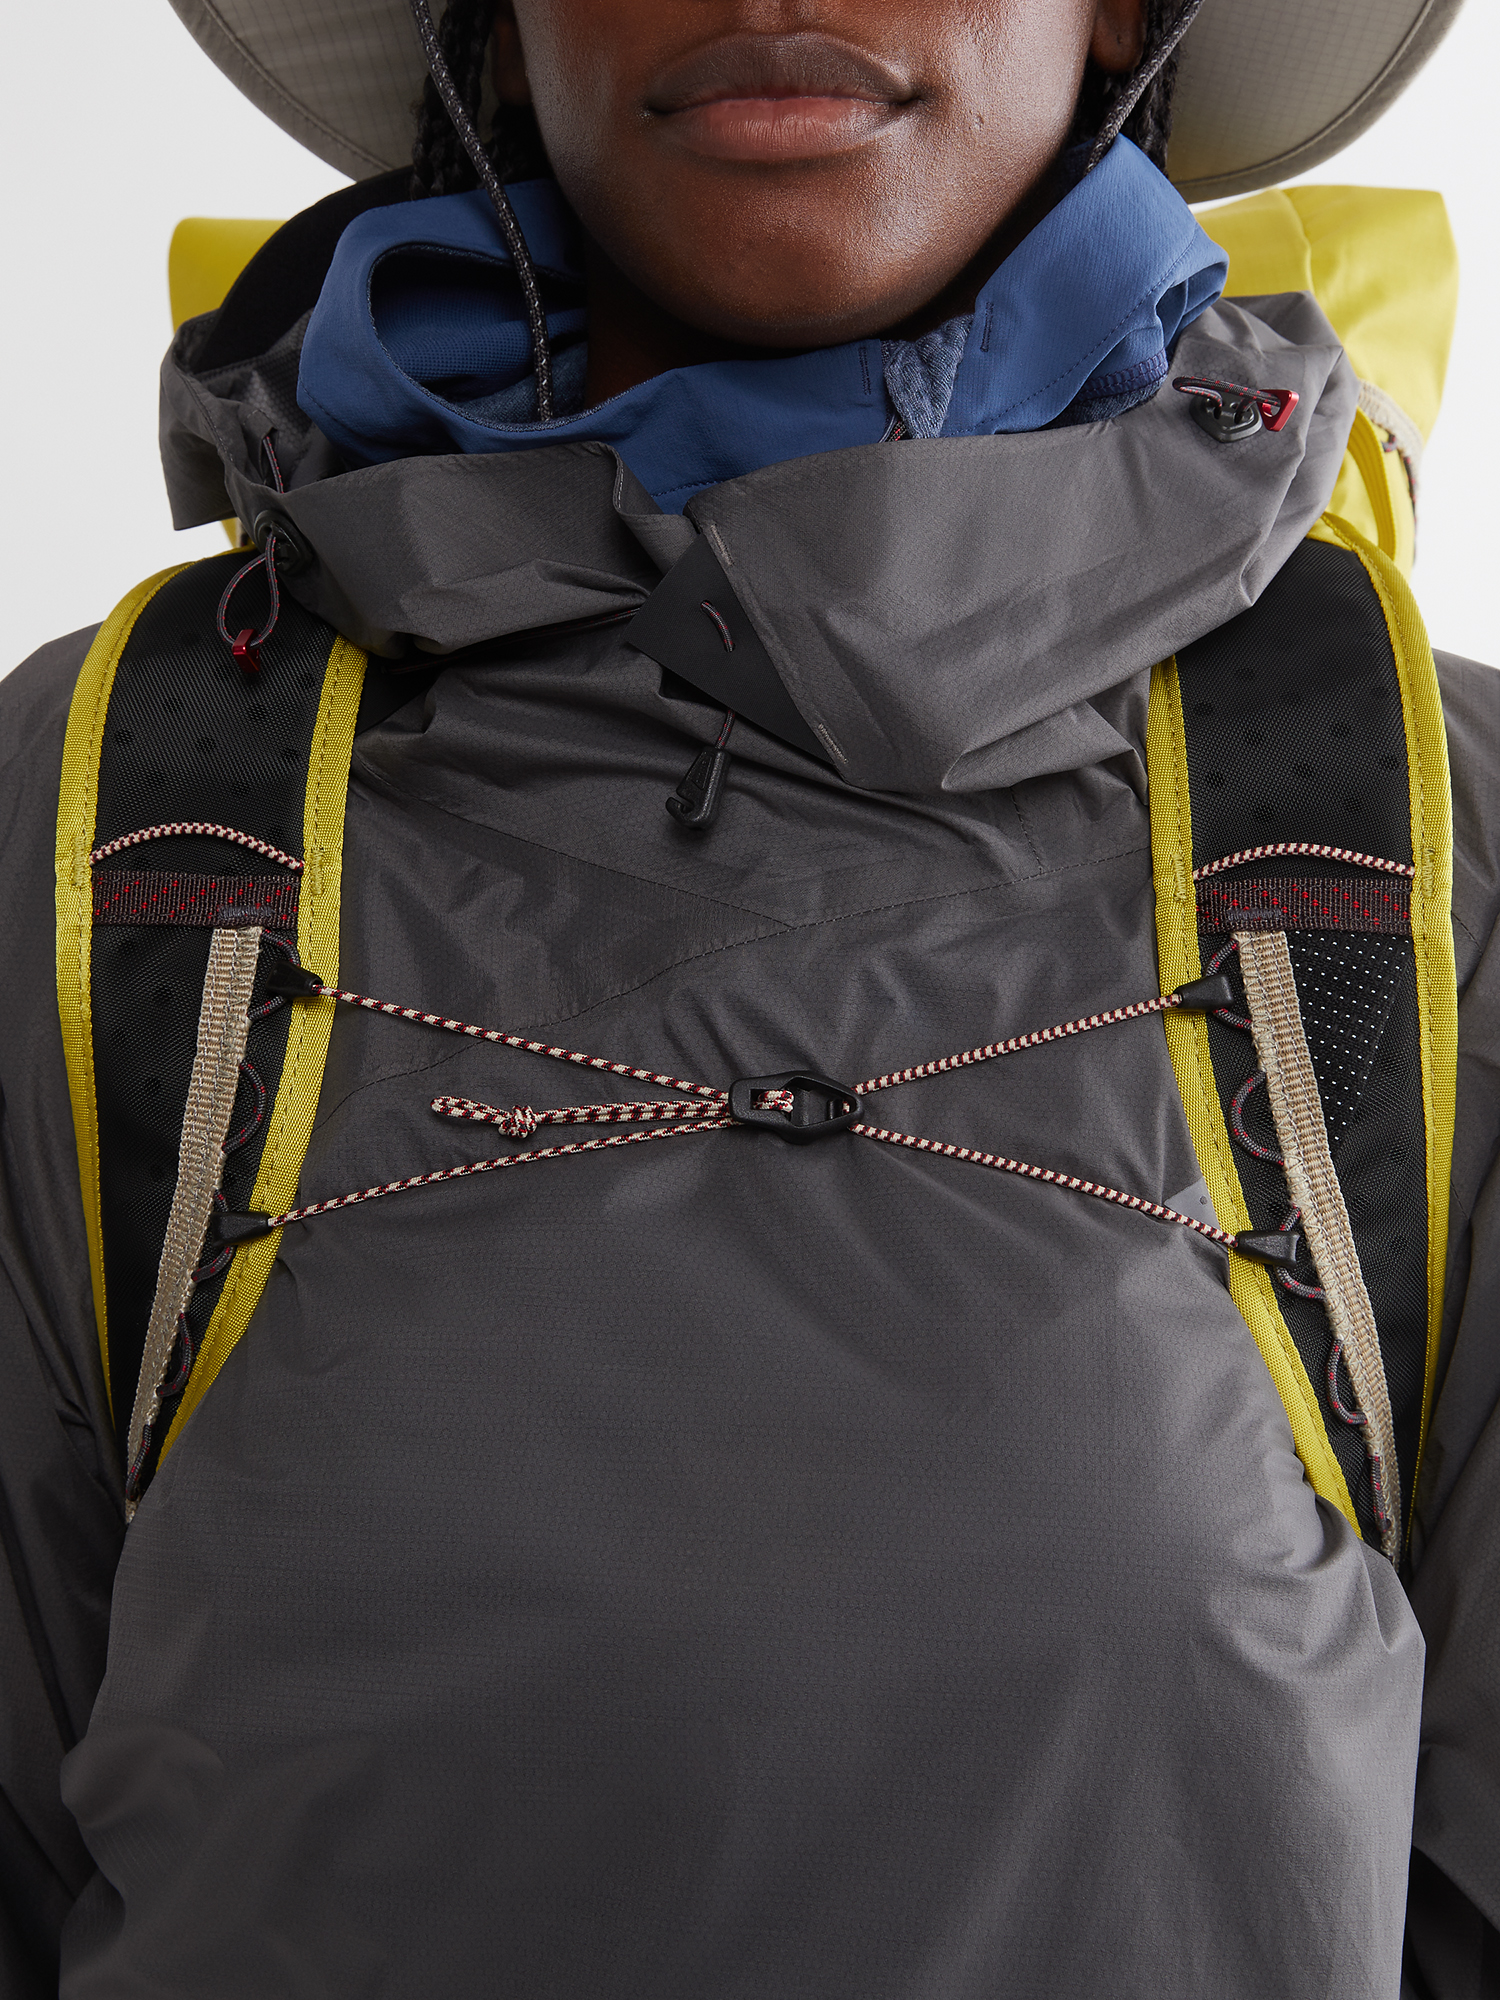 10122 - 197 Retina Mountain Backpack - Pine Sprout